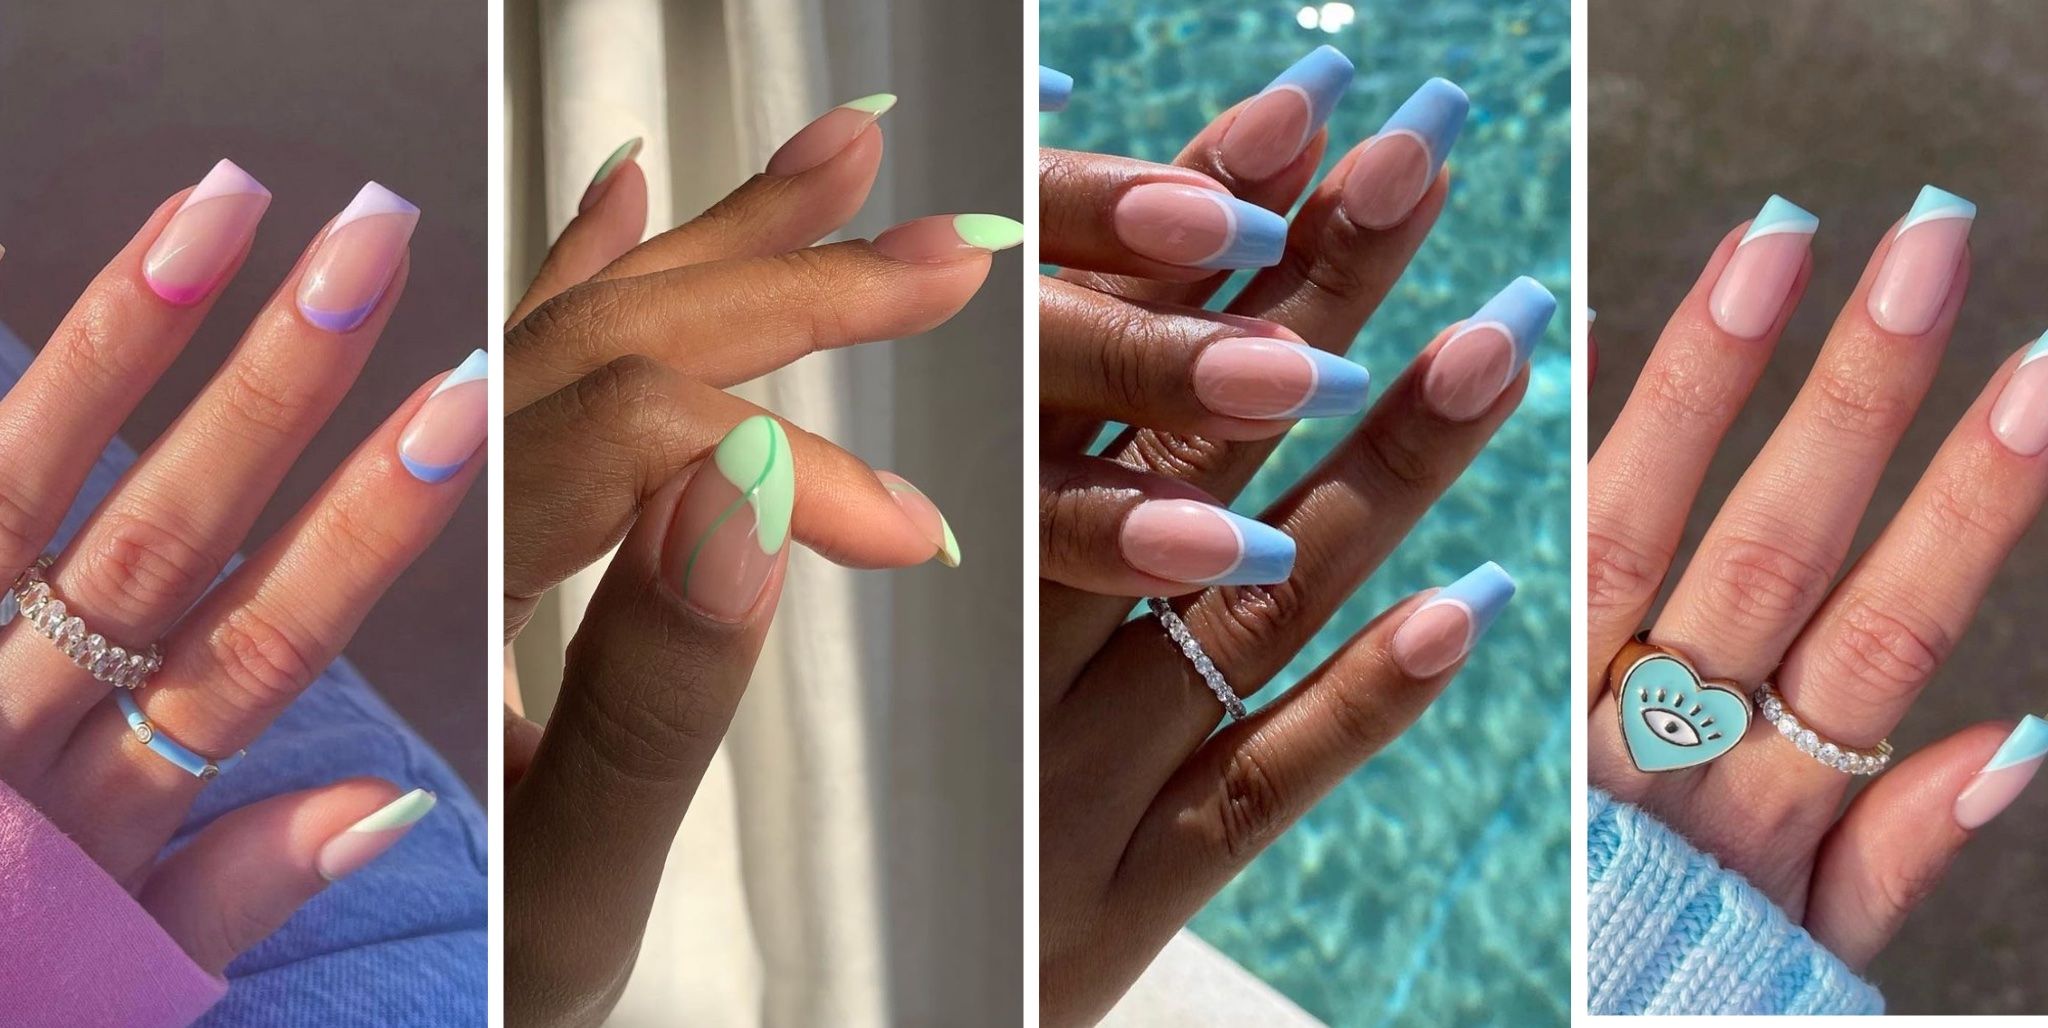 The return of naked nails: why buffed, bare manicures are trending